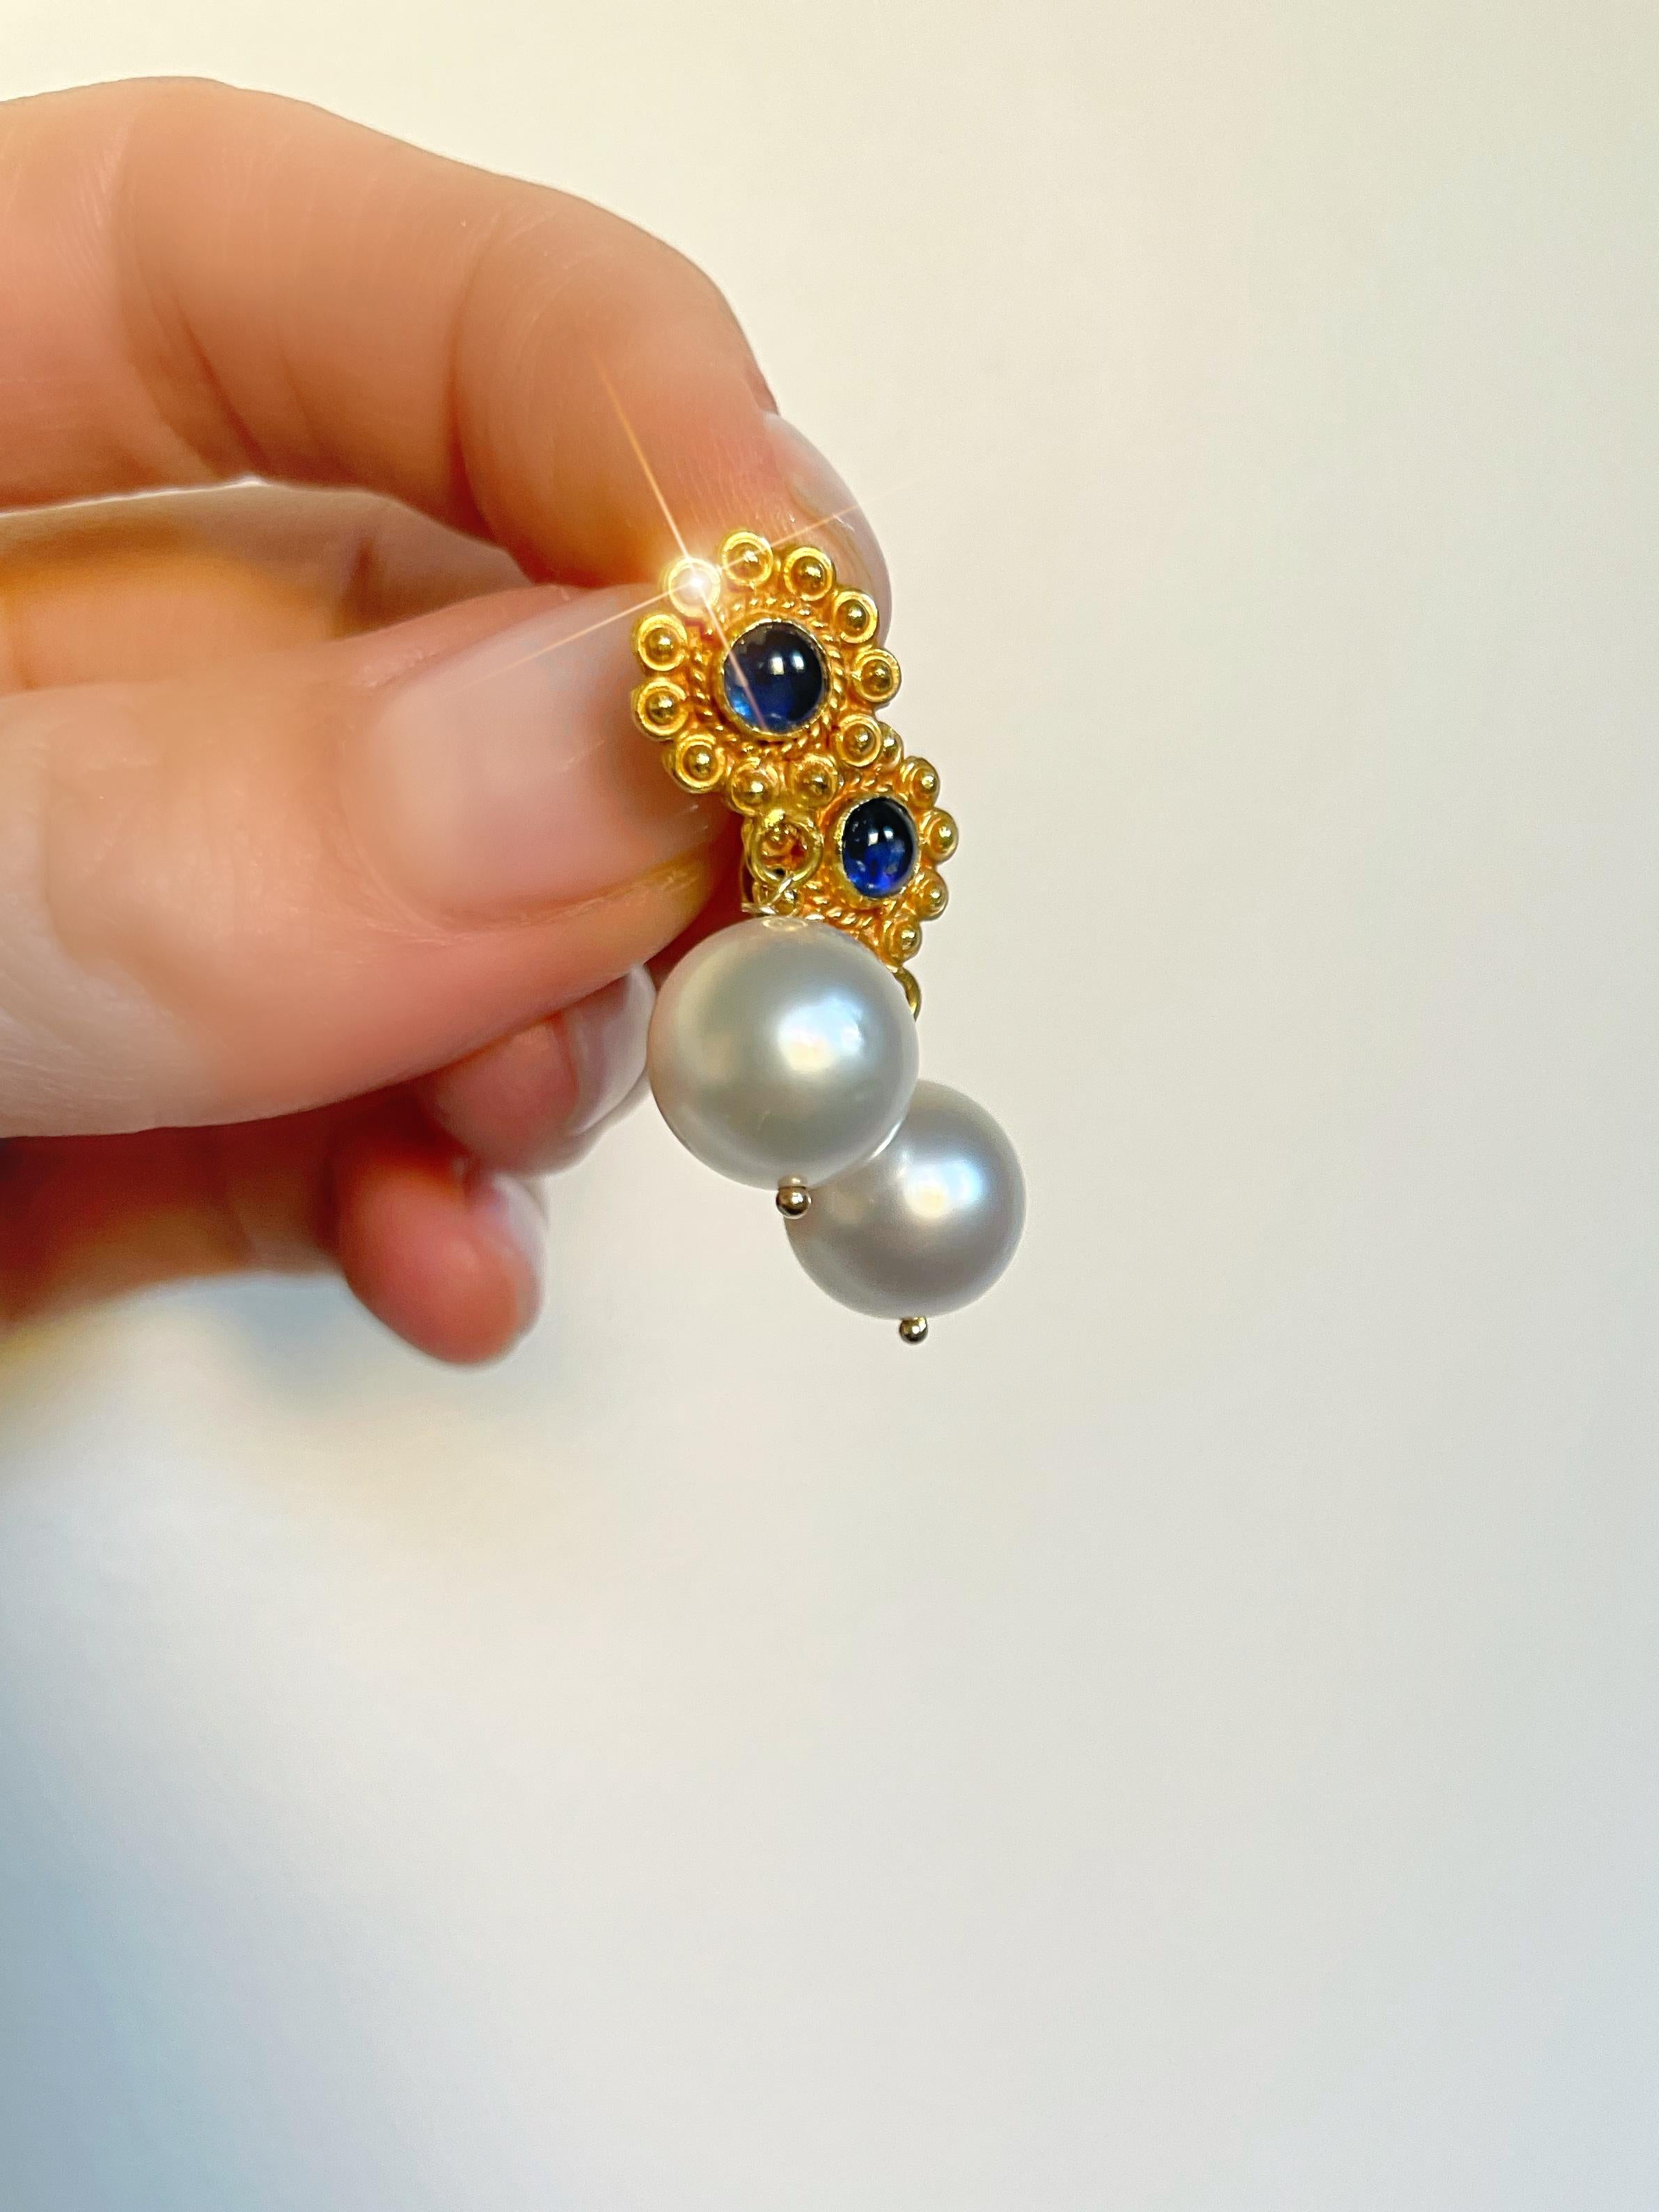 Set in rich 18k yellow gold with elegantly designed post-back closures, framing two perfectly matched blue sapphire cabochons. Completing the design are 2 lustrous South Sea pearls suspended to give just the right movement to the earring. No detail